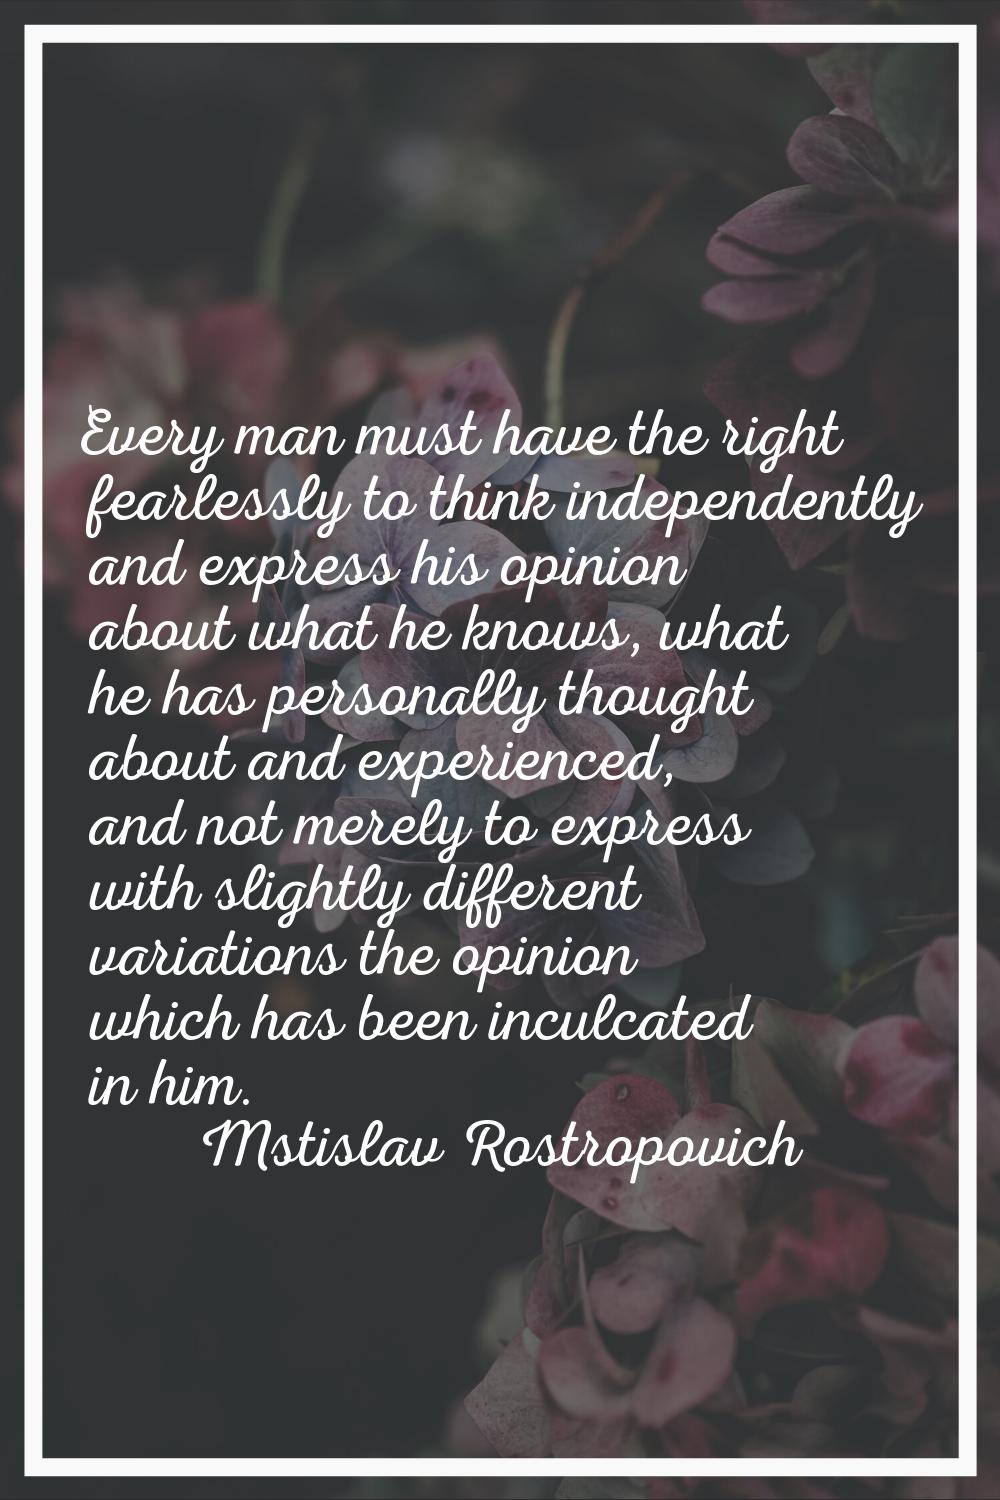 Every man must have the right fearlessly to think independently and express his opinion about what 